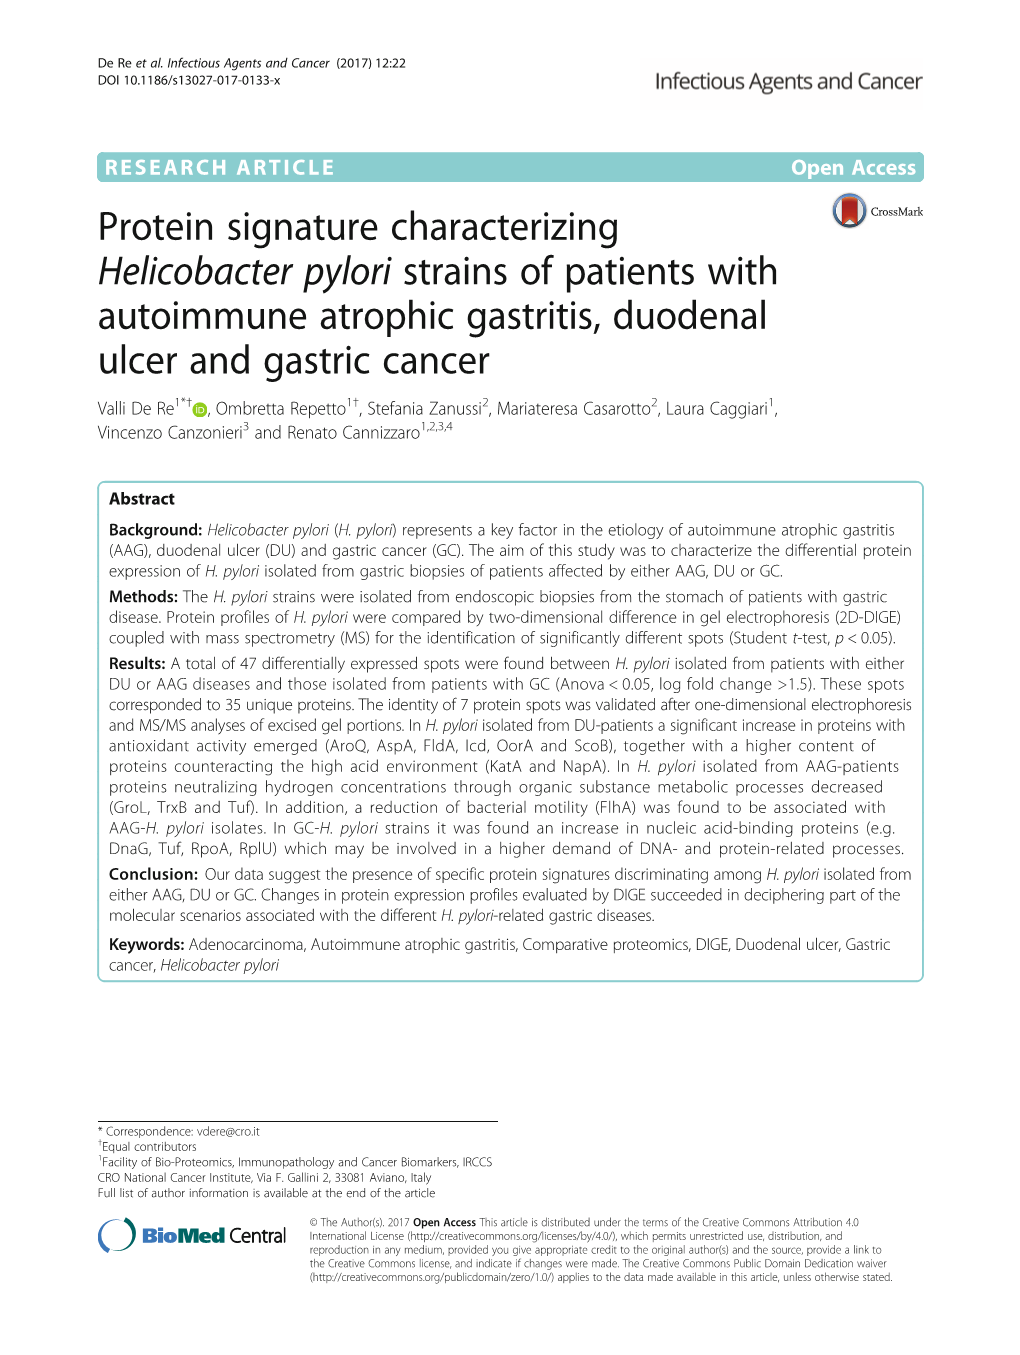 Protein Signature Characterizing Helicobacter Pylori Strains Of